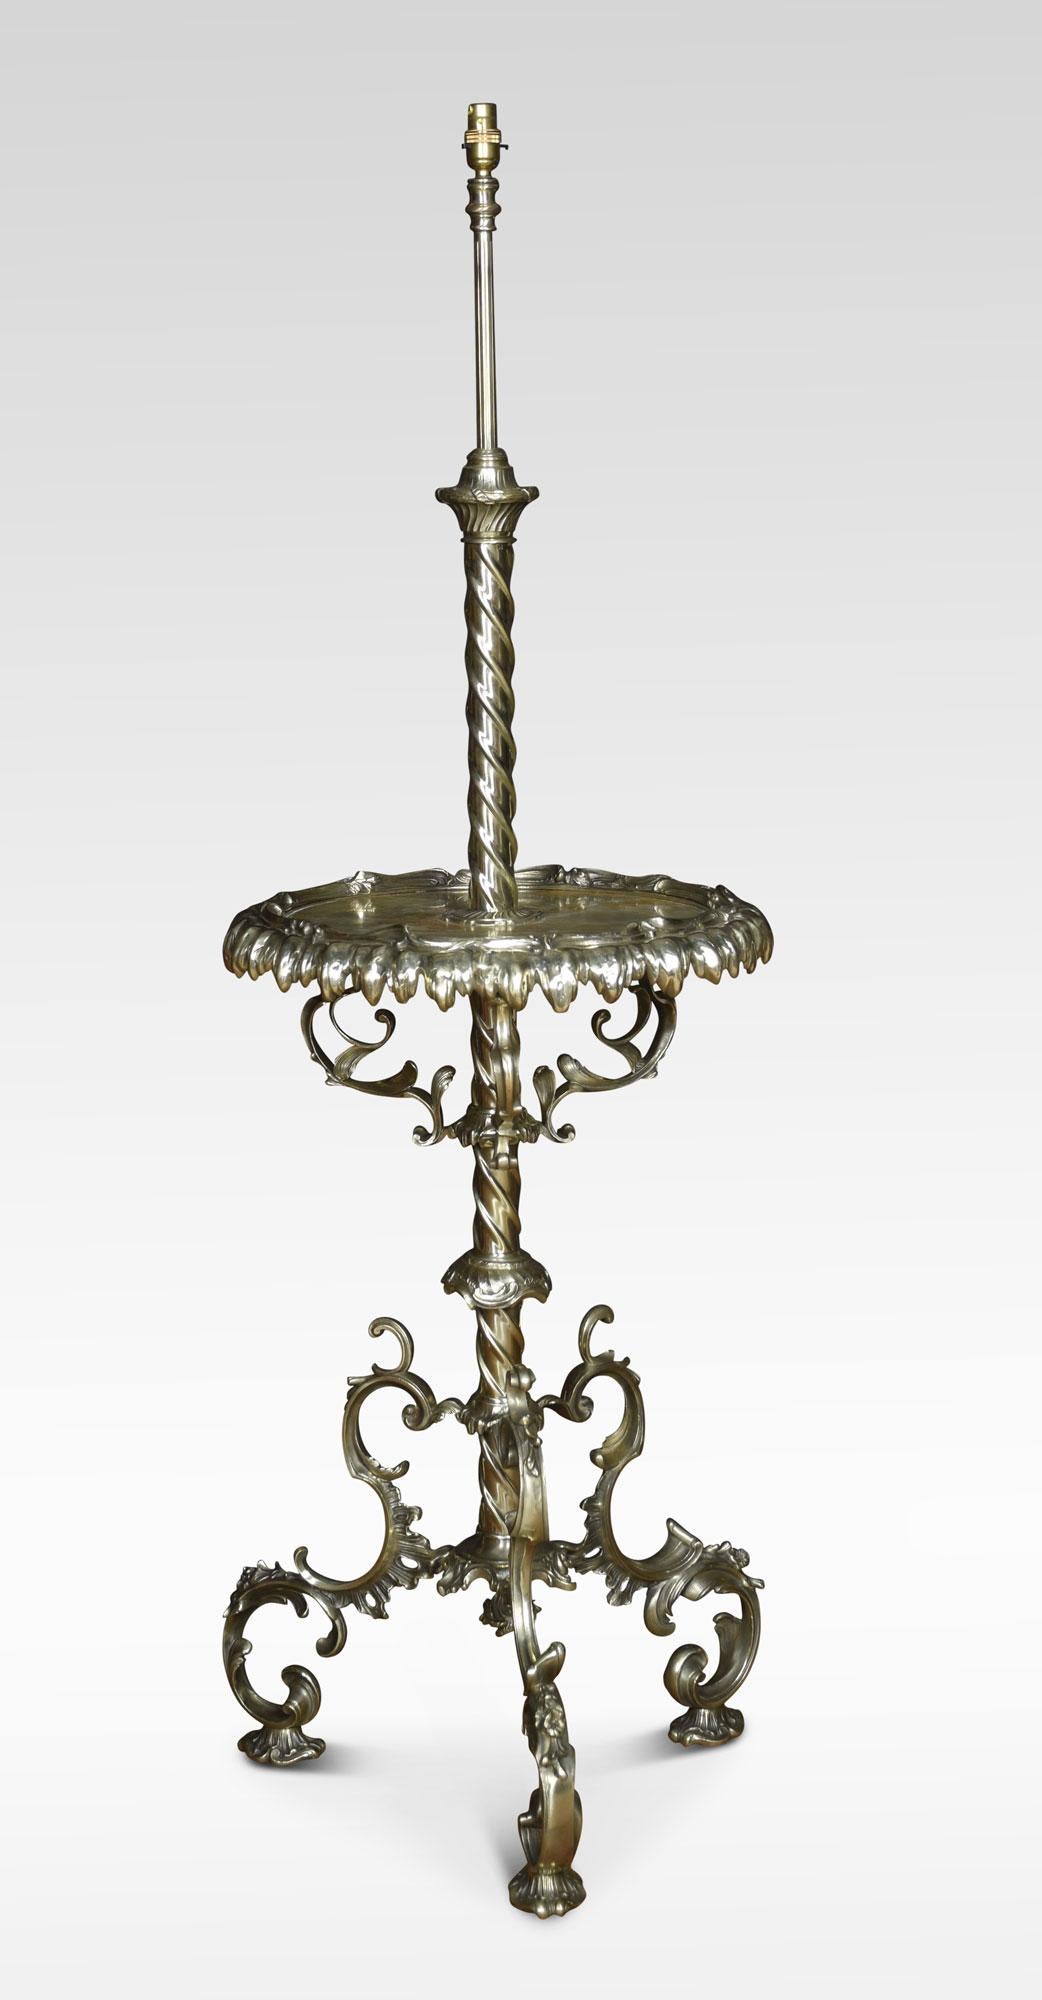 Rococo revival brass and onyx standard lamp table, the rope twist column supporting a circular onyx tabletop with a scrolling cast brass border. All raised upon three cast foliate supports.
Dimensions
Height 61 inches height with shade 67